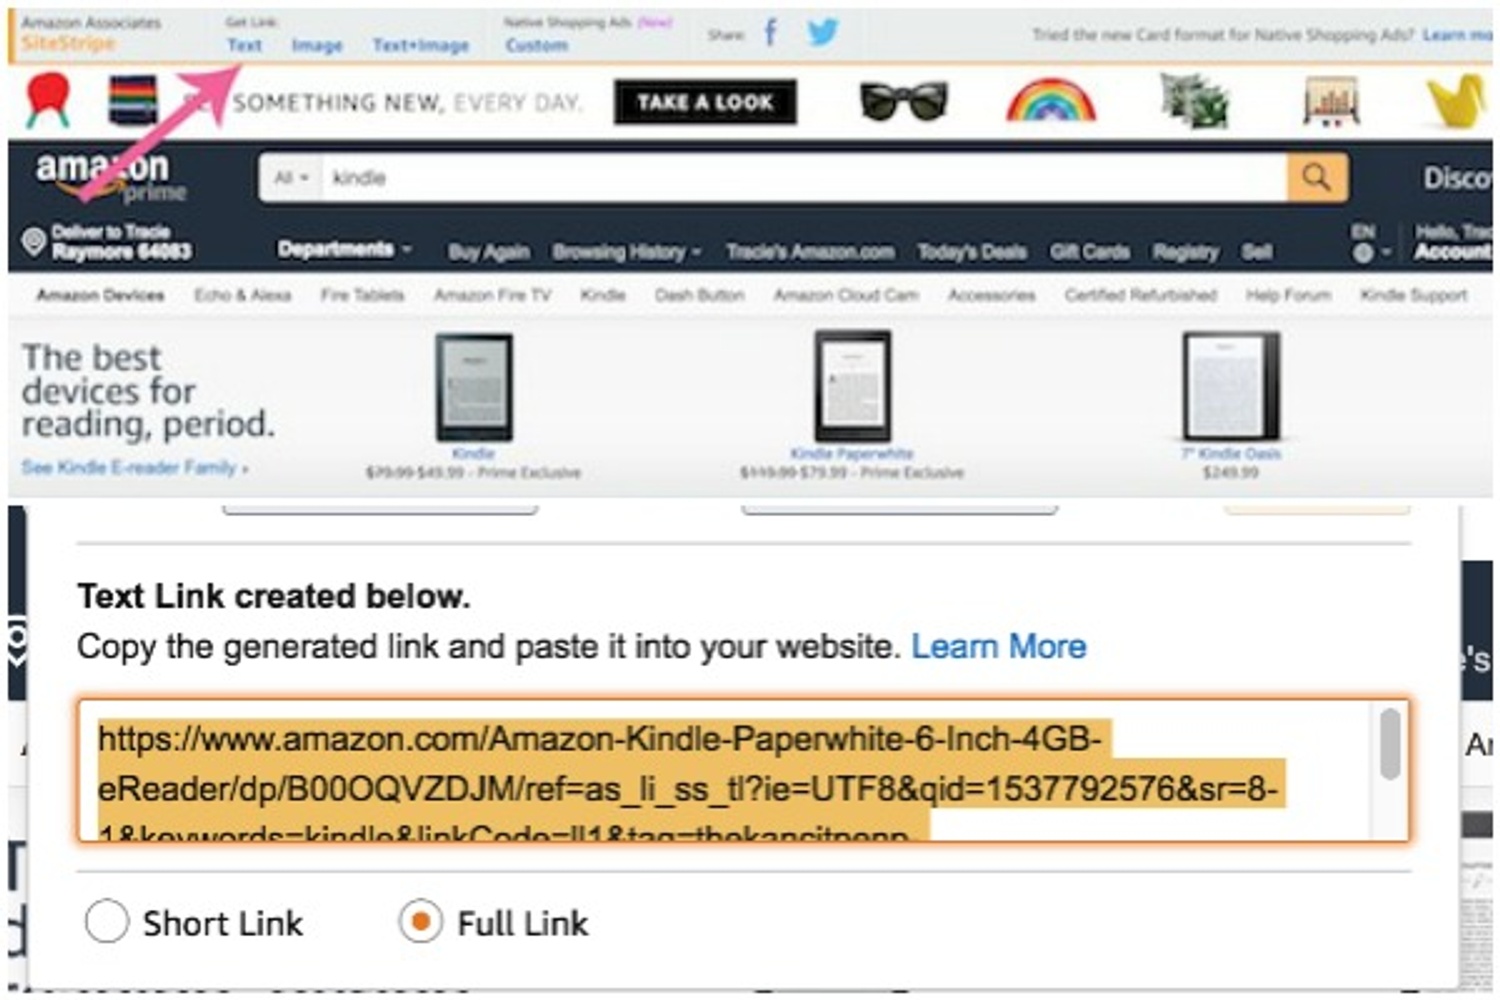 The Ultimate Guide to Using the Amazon Associates Program